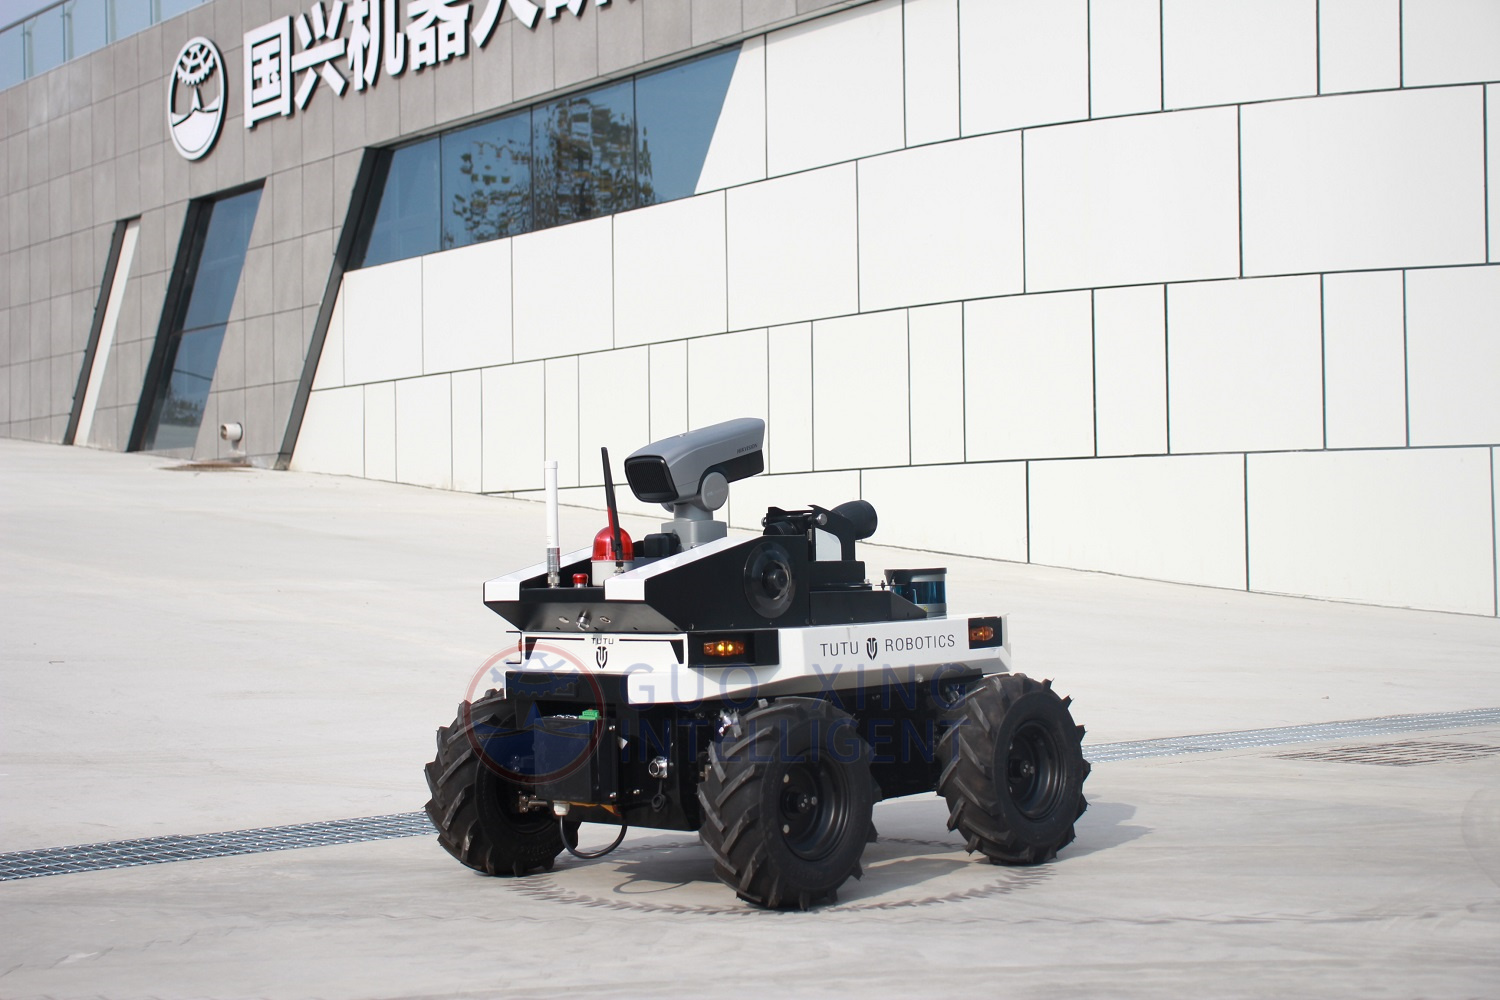 Outdoor Security System Patrol Service Robot WT1000